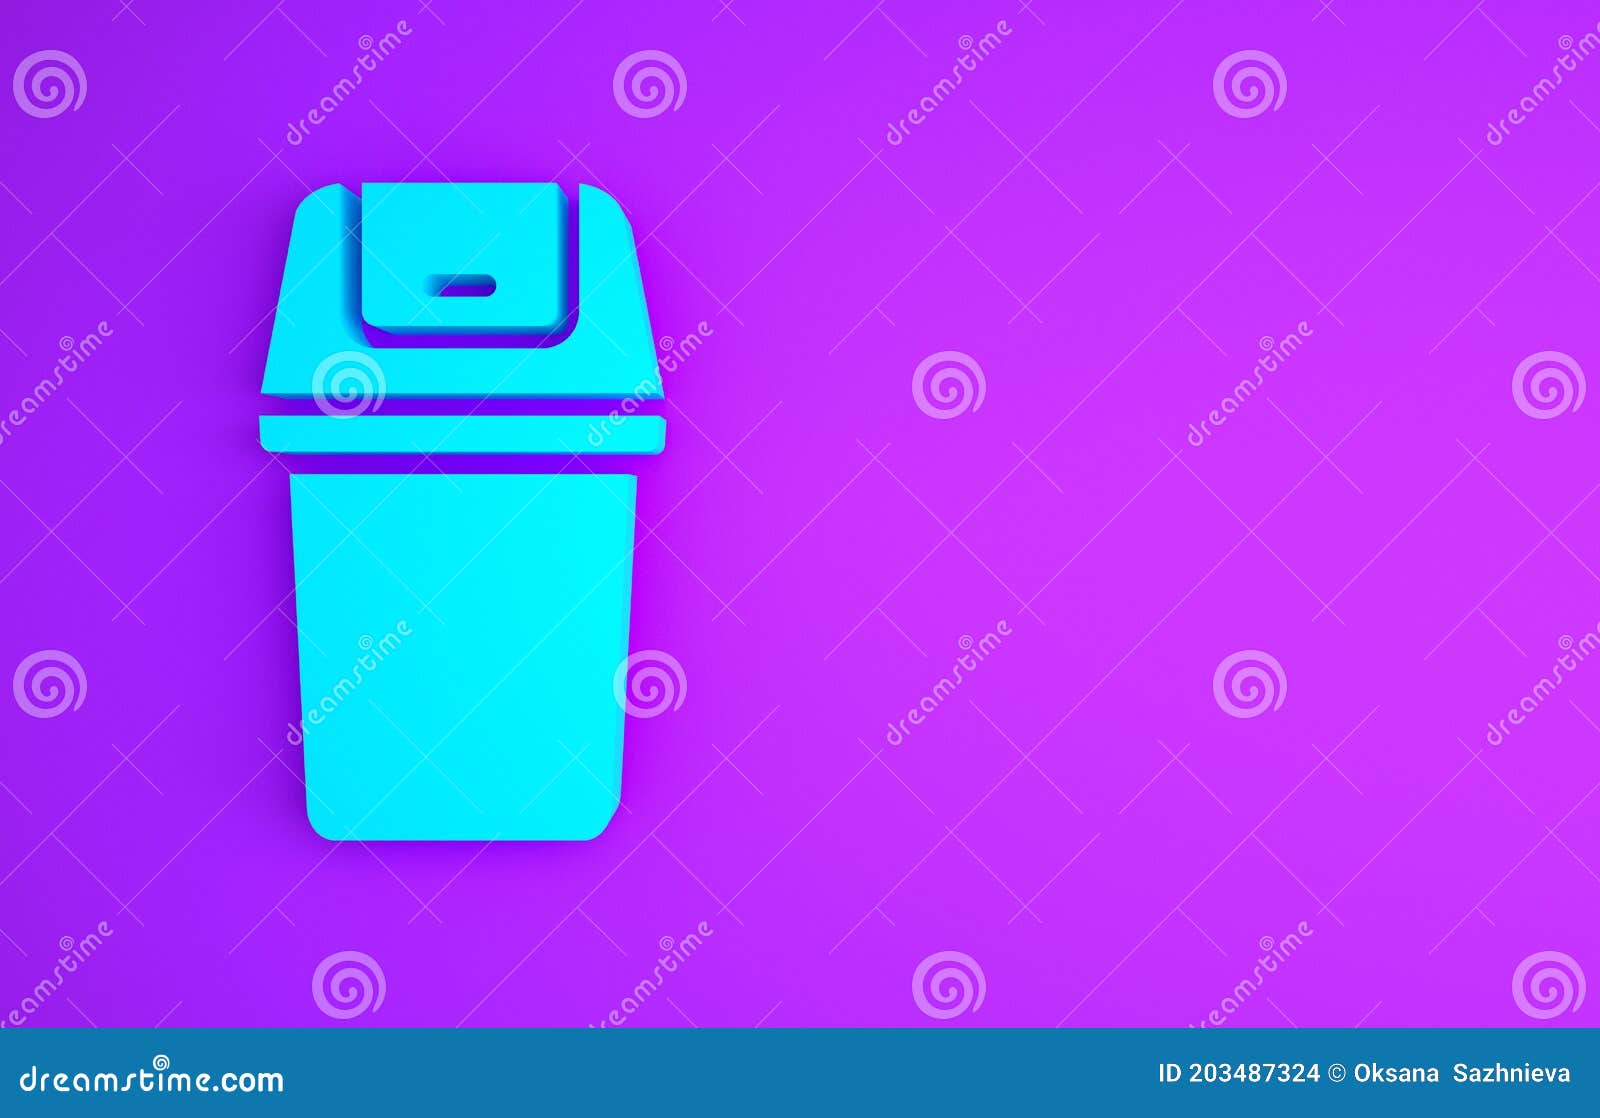 Blue Trash Can Icon Isolated on Purple Background. Garbage Bin Sign ...